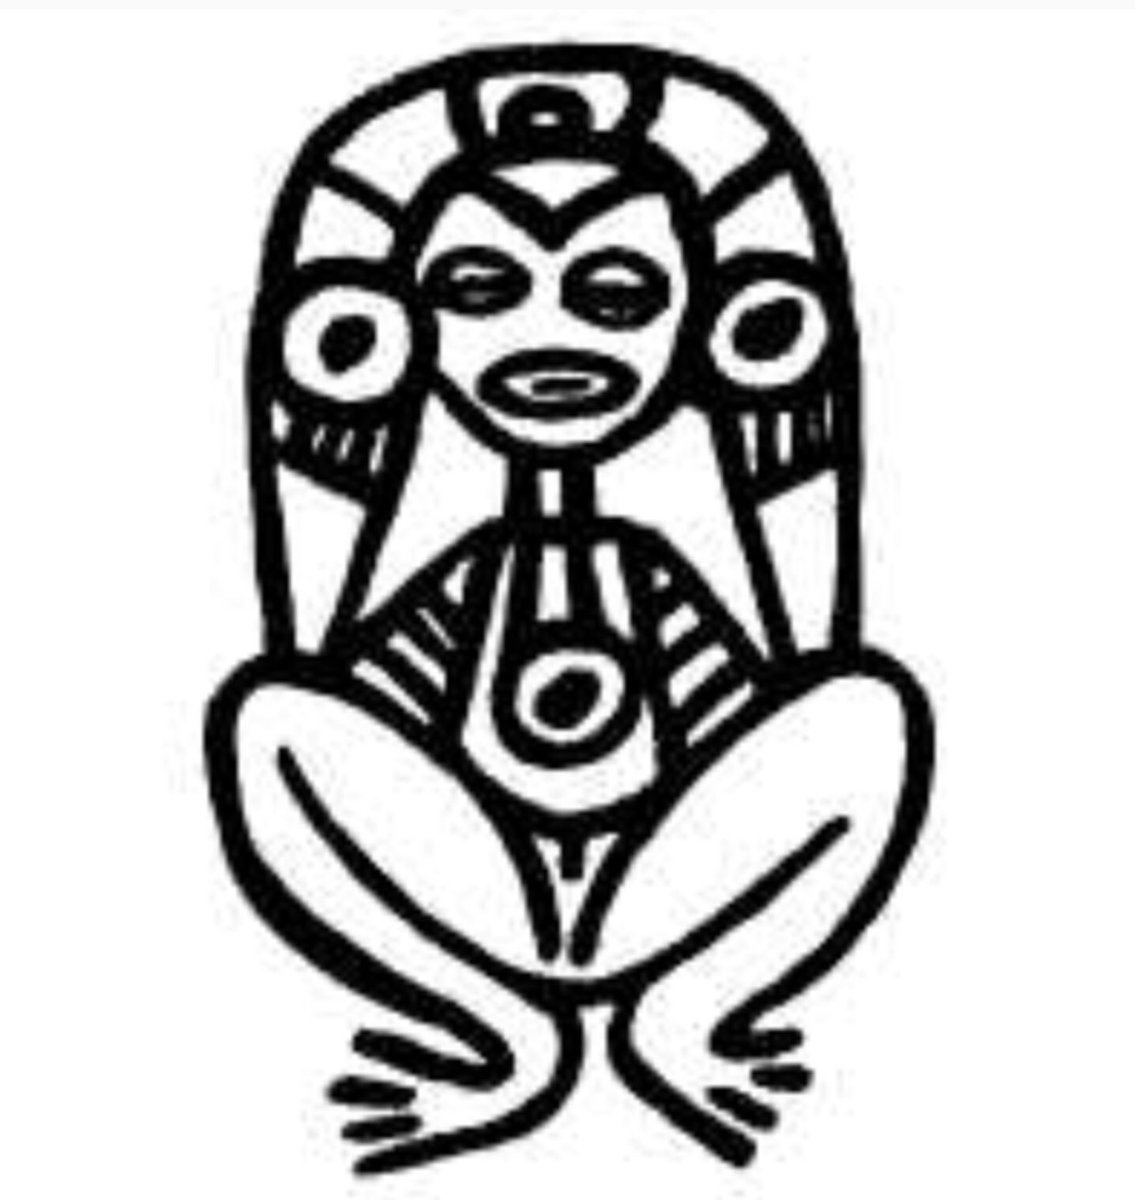 Earth Mother, Mother Moon. #fullmoon #wintersolstice #Taino #Atabey #Atabex...